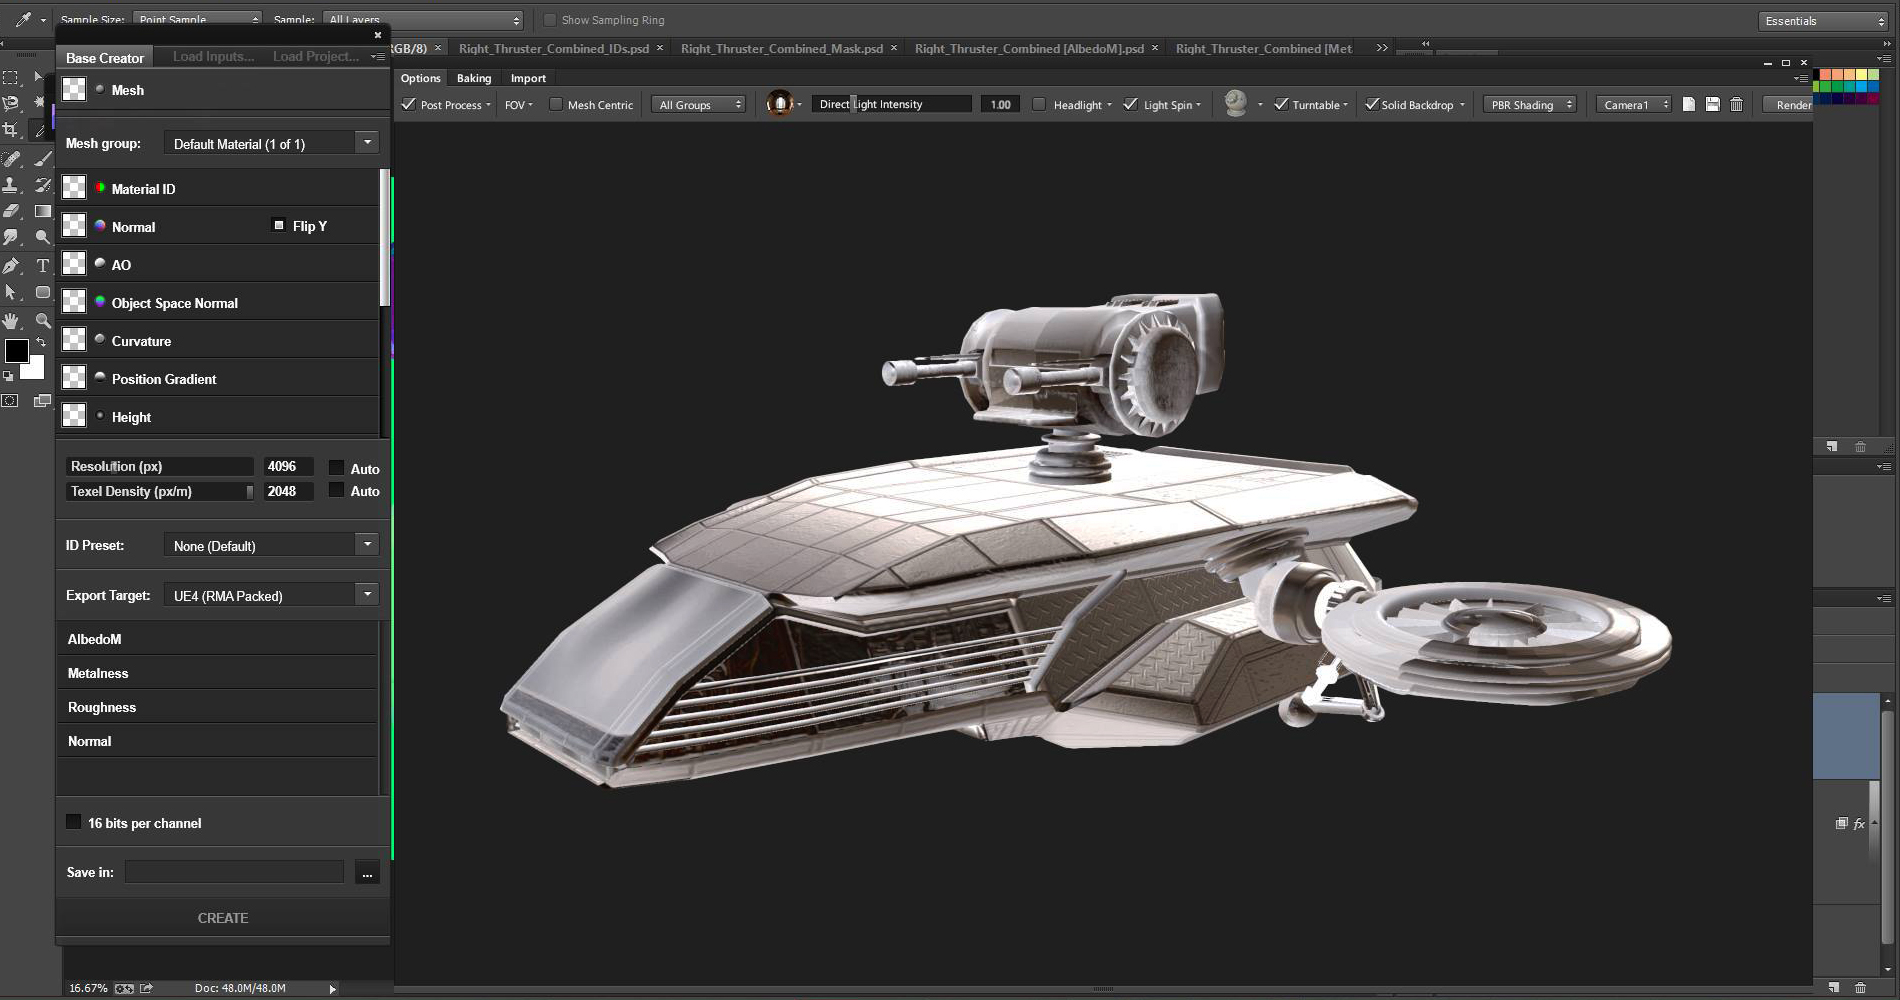 Remastering process of on of our hovercrafts, Aquila Audax.